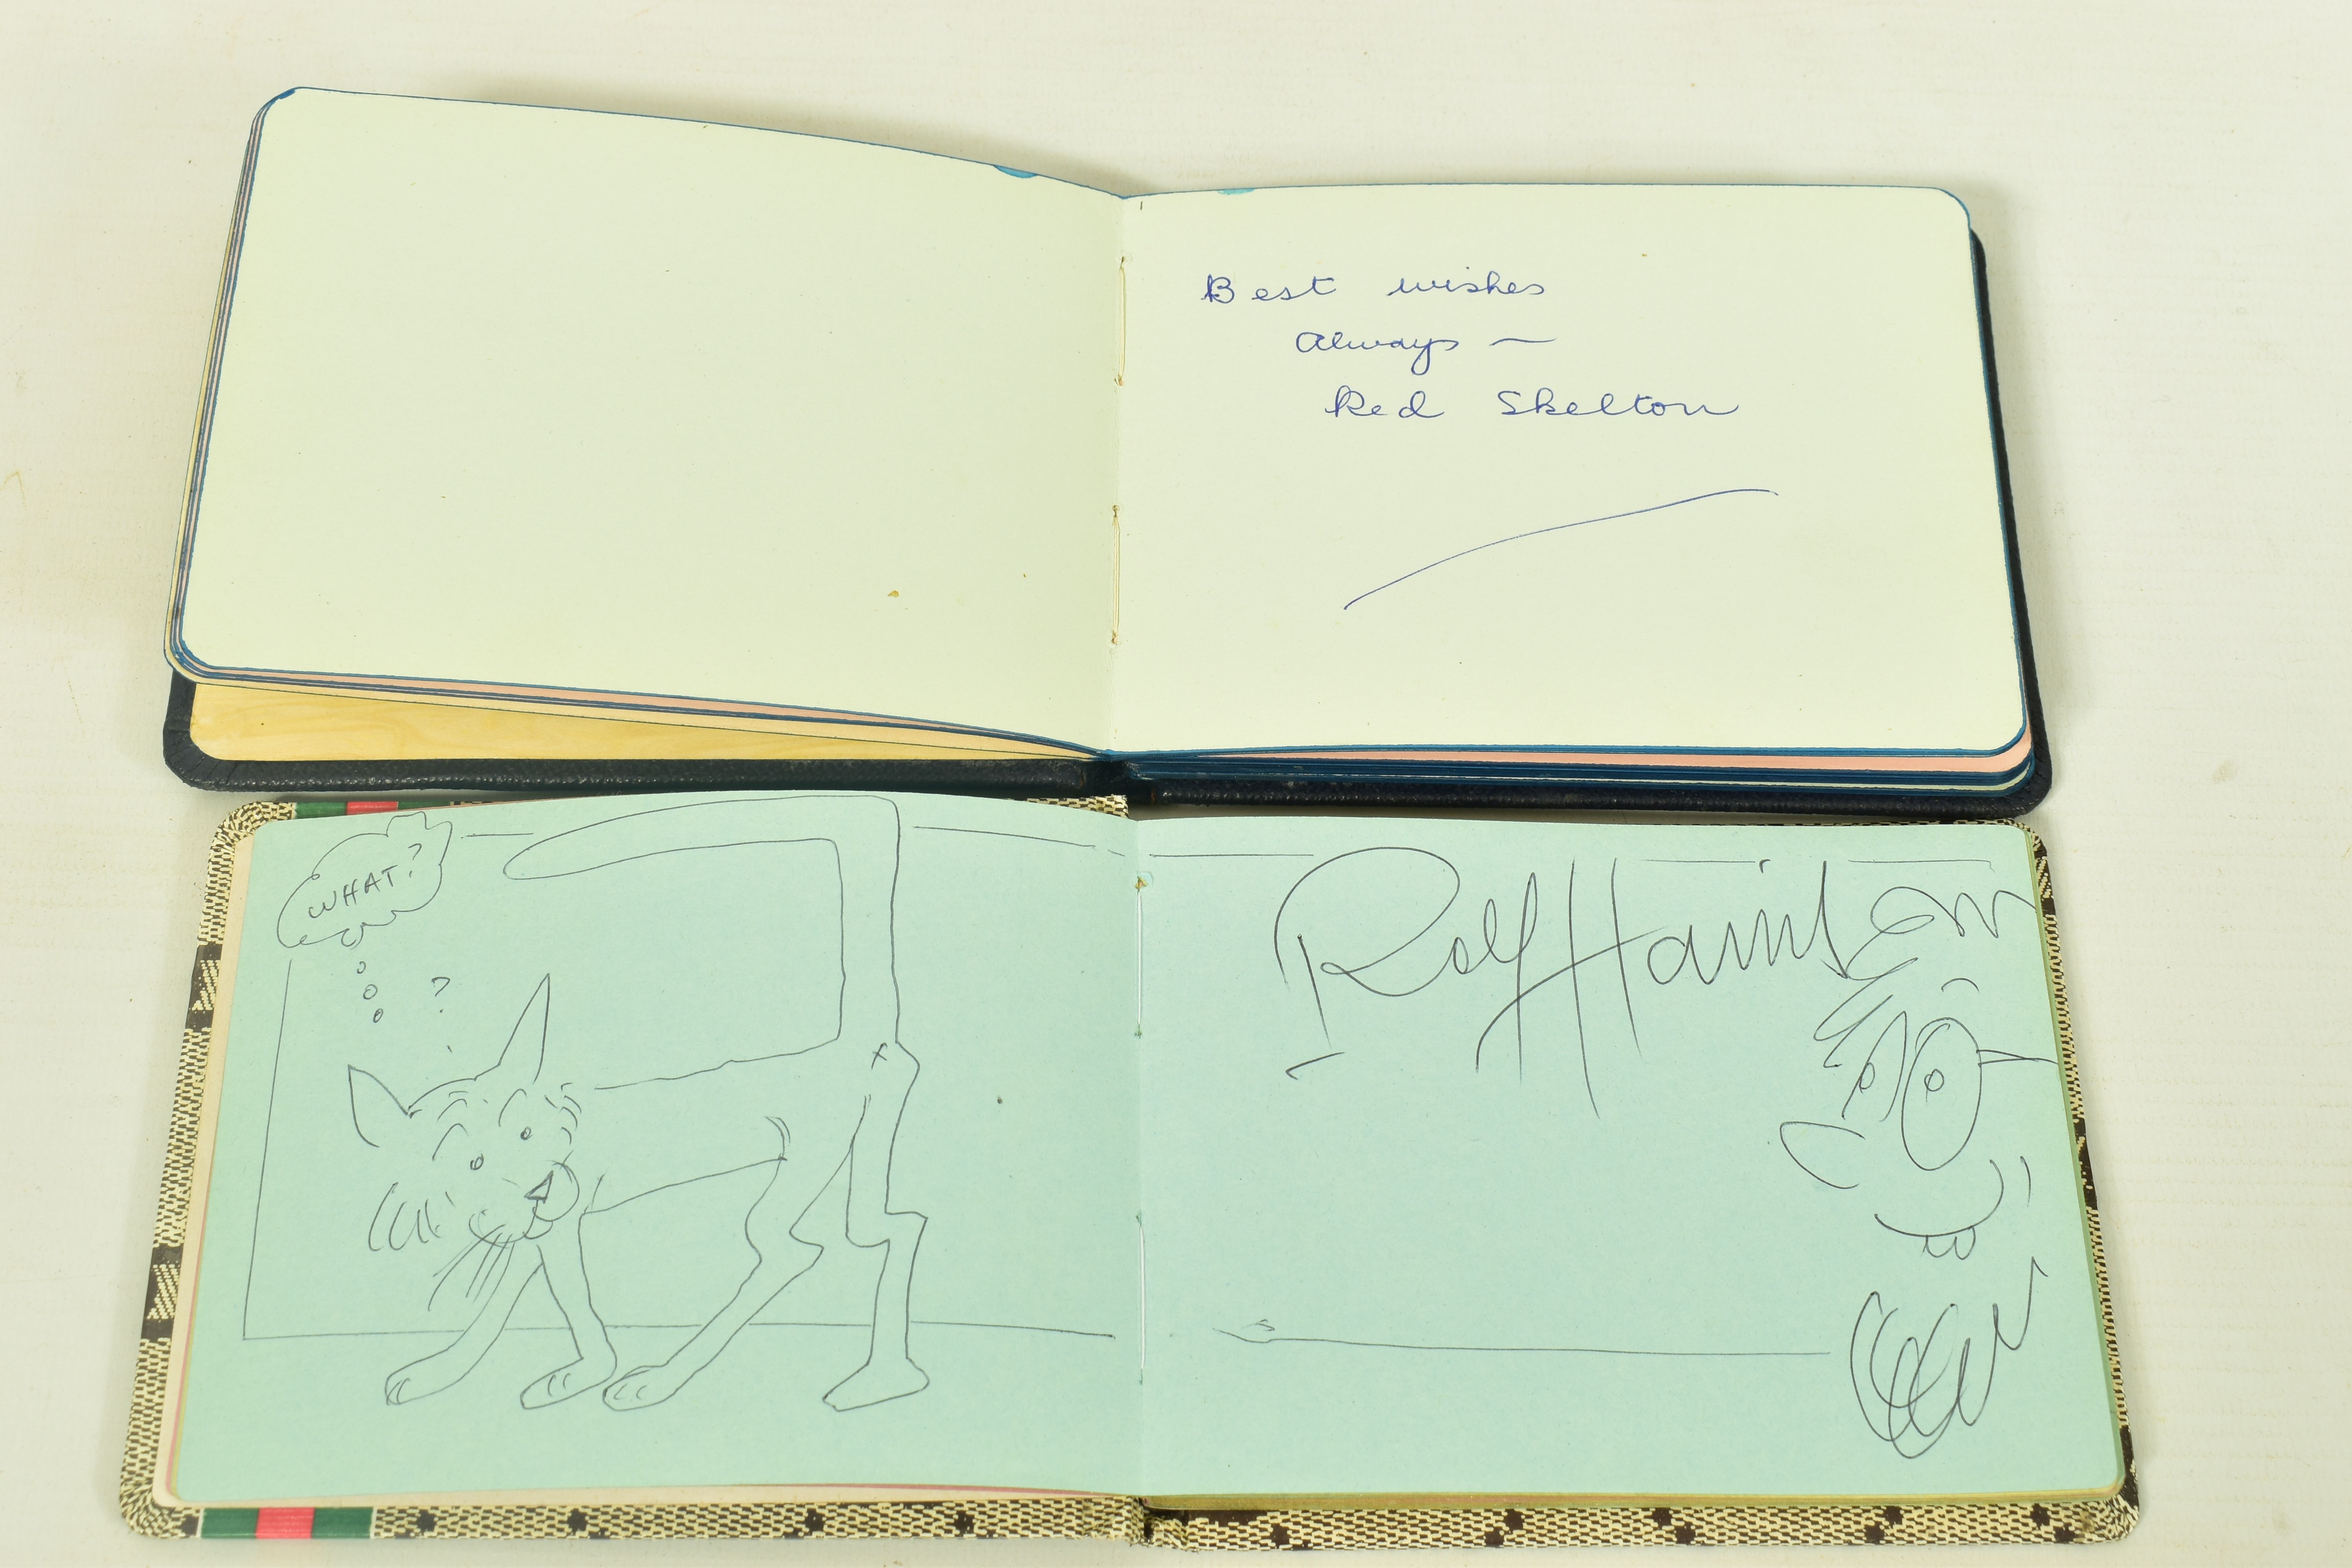 FILM & STAGE AUTOGRAPH ALBUM, a collection of signatures in two autograph albums featuring some of - Image 4 of 8